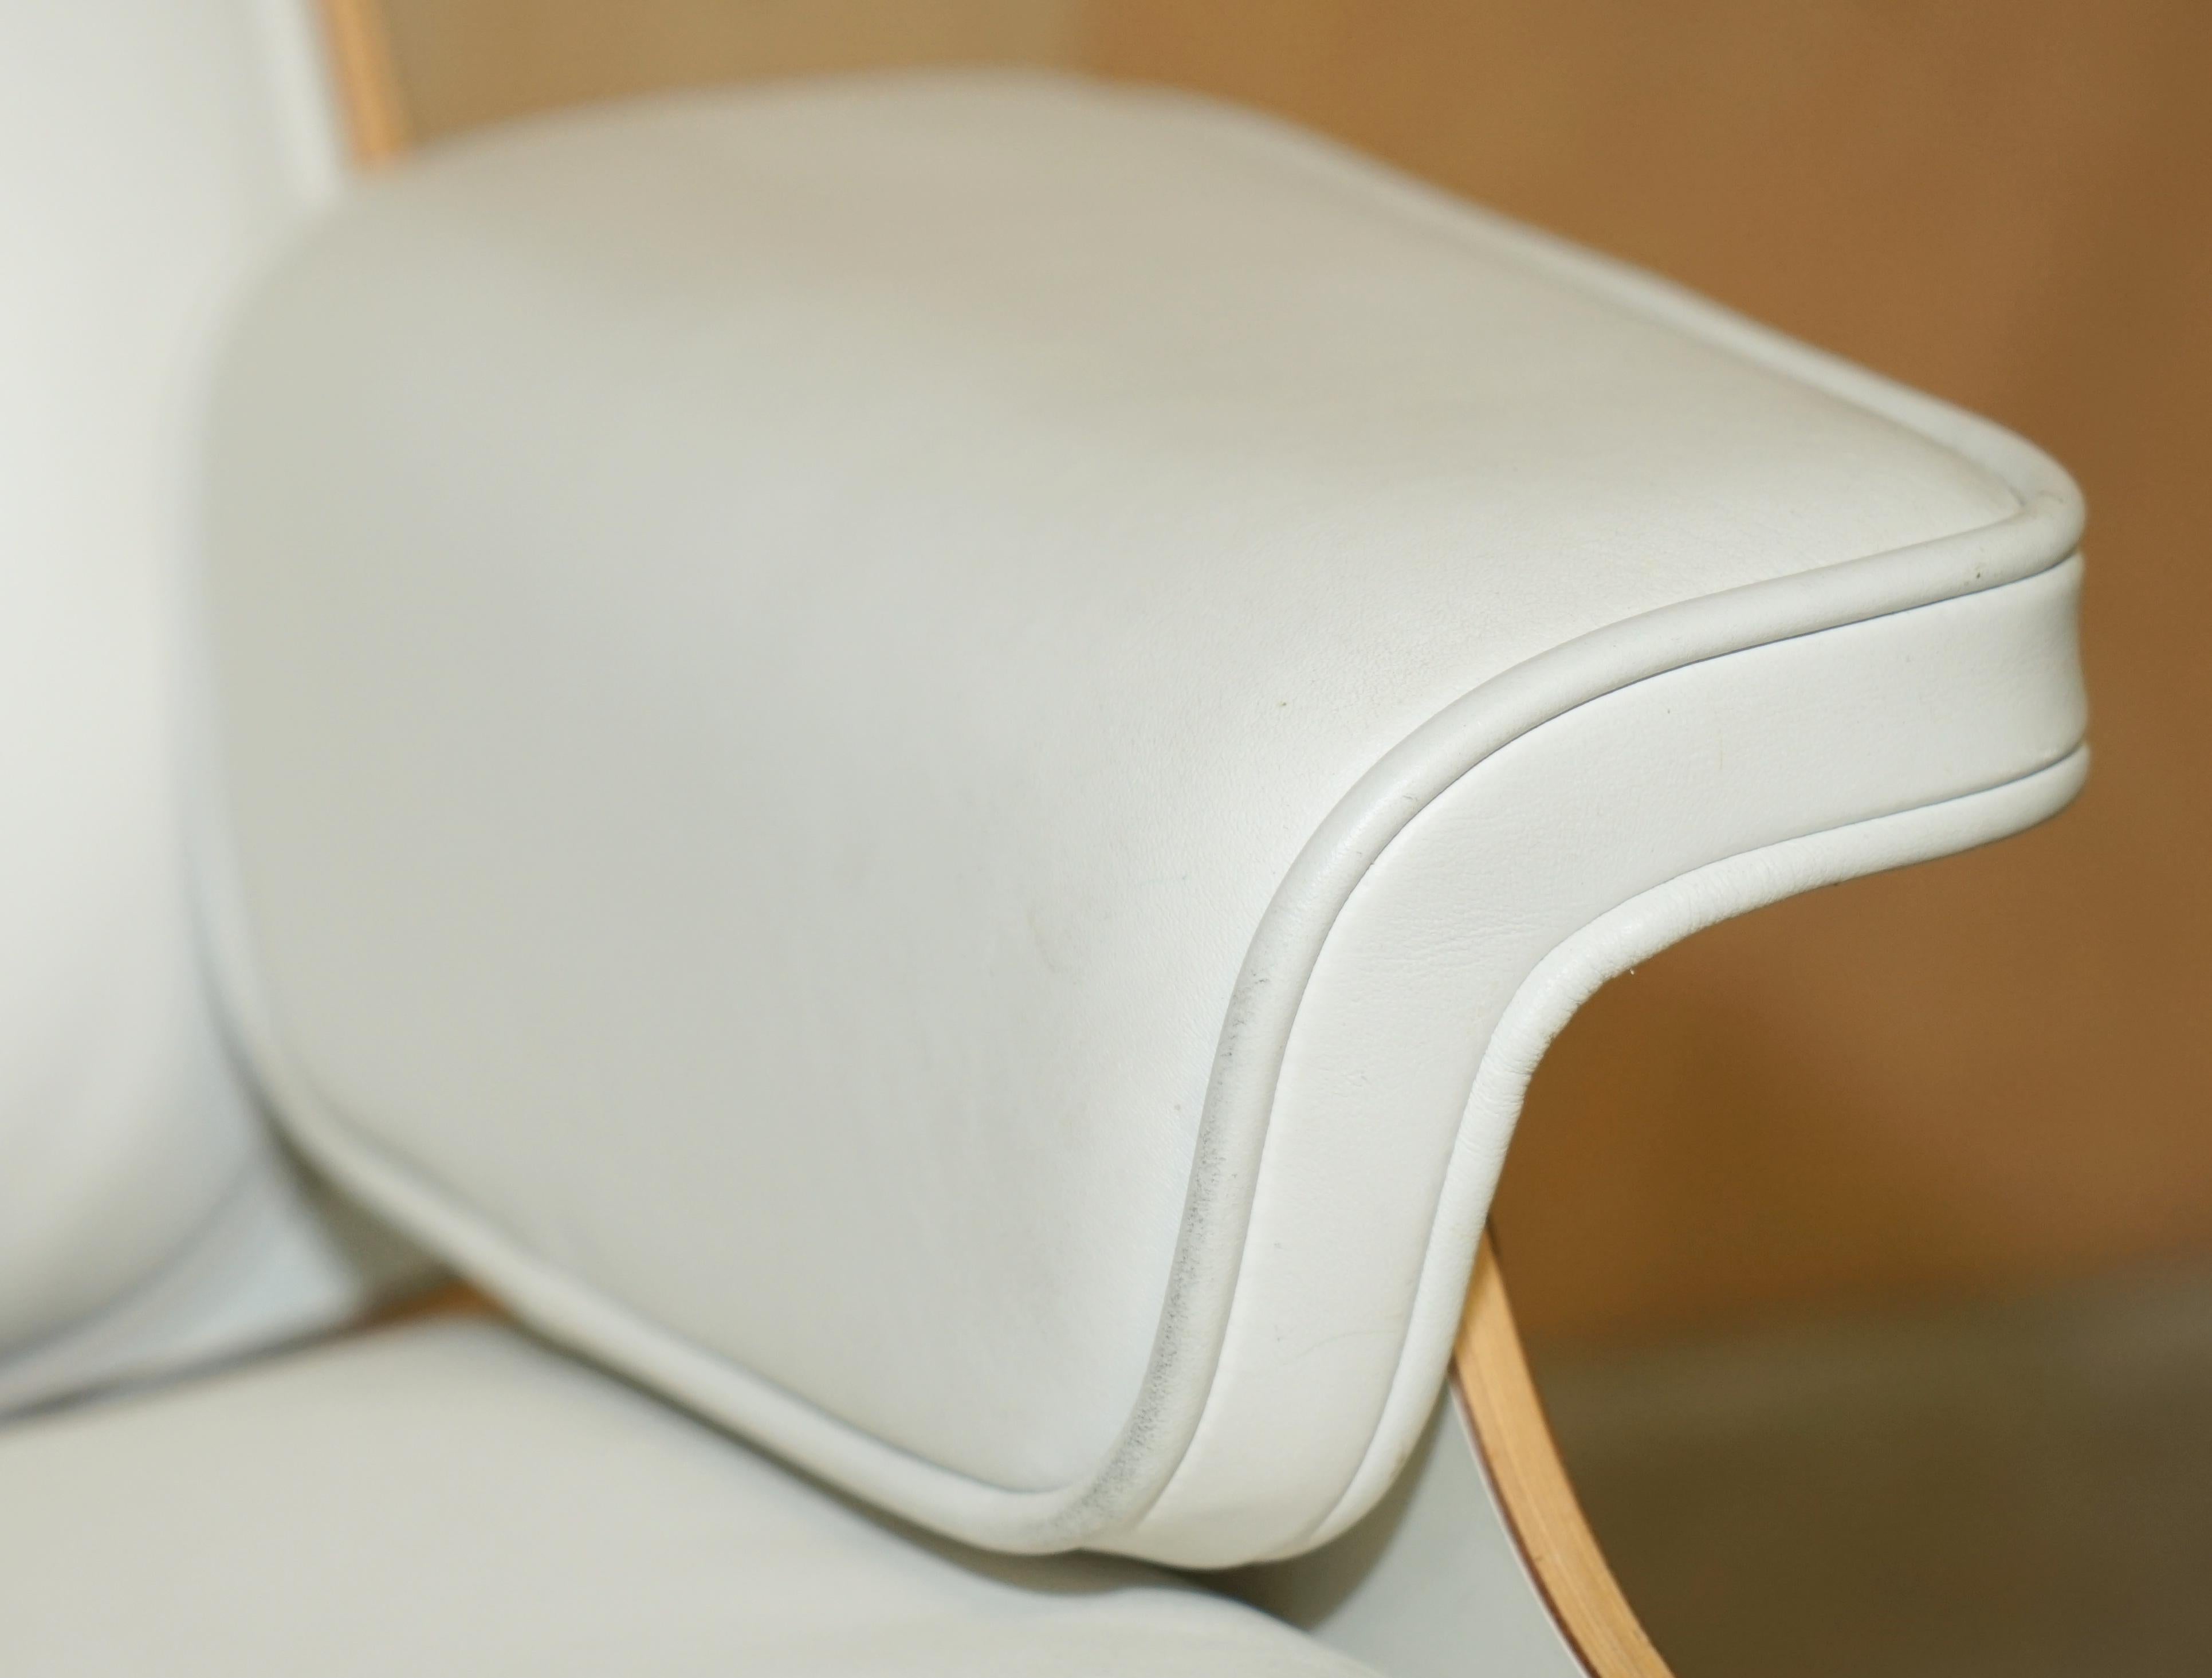 Whiting fauteuil de salon Charles and Ray Eames american cherry wood white leather en vente 3